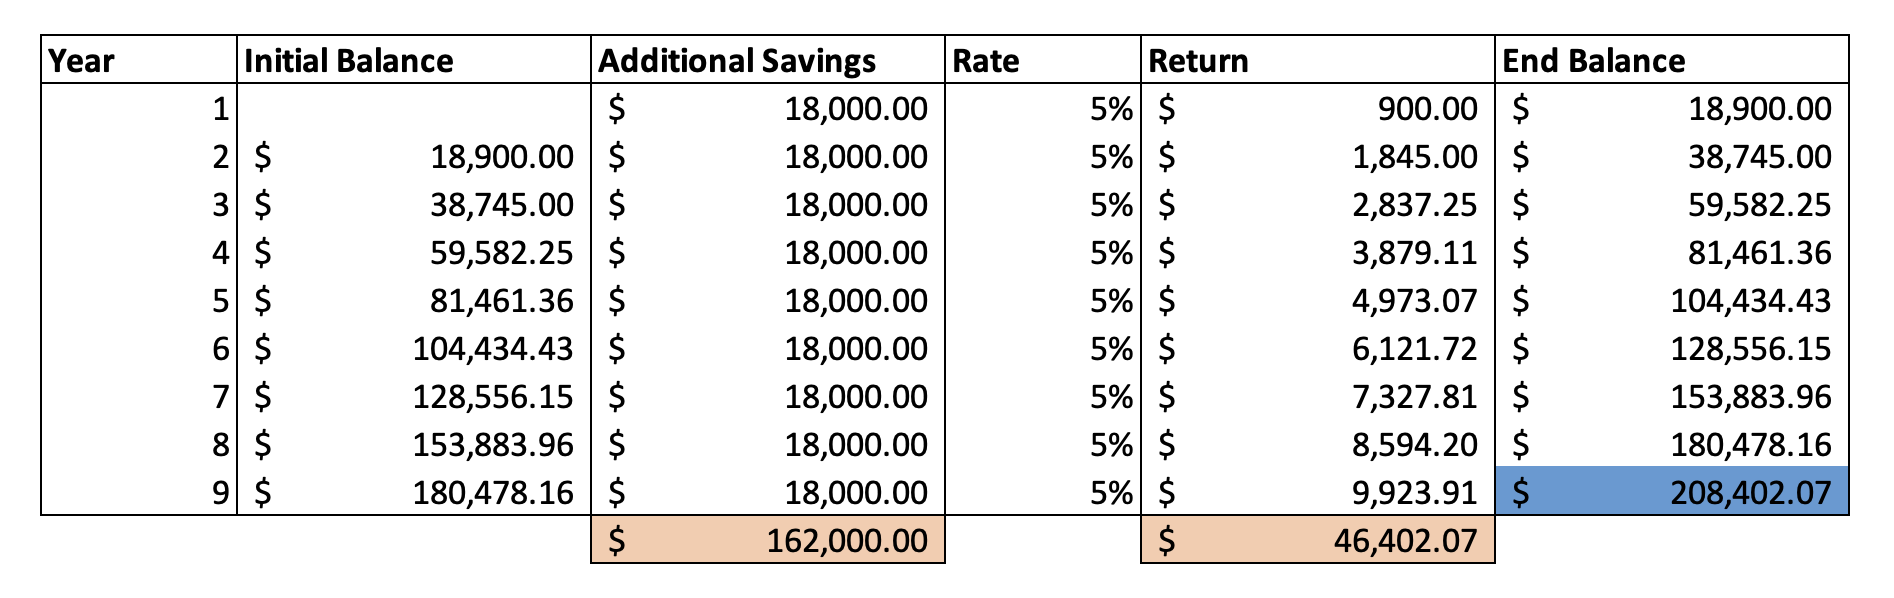 $200,000 in 9 years by saving $18,000 a year with a 5% return